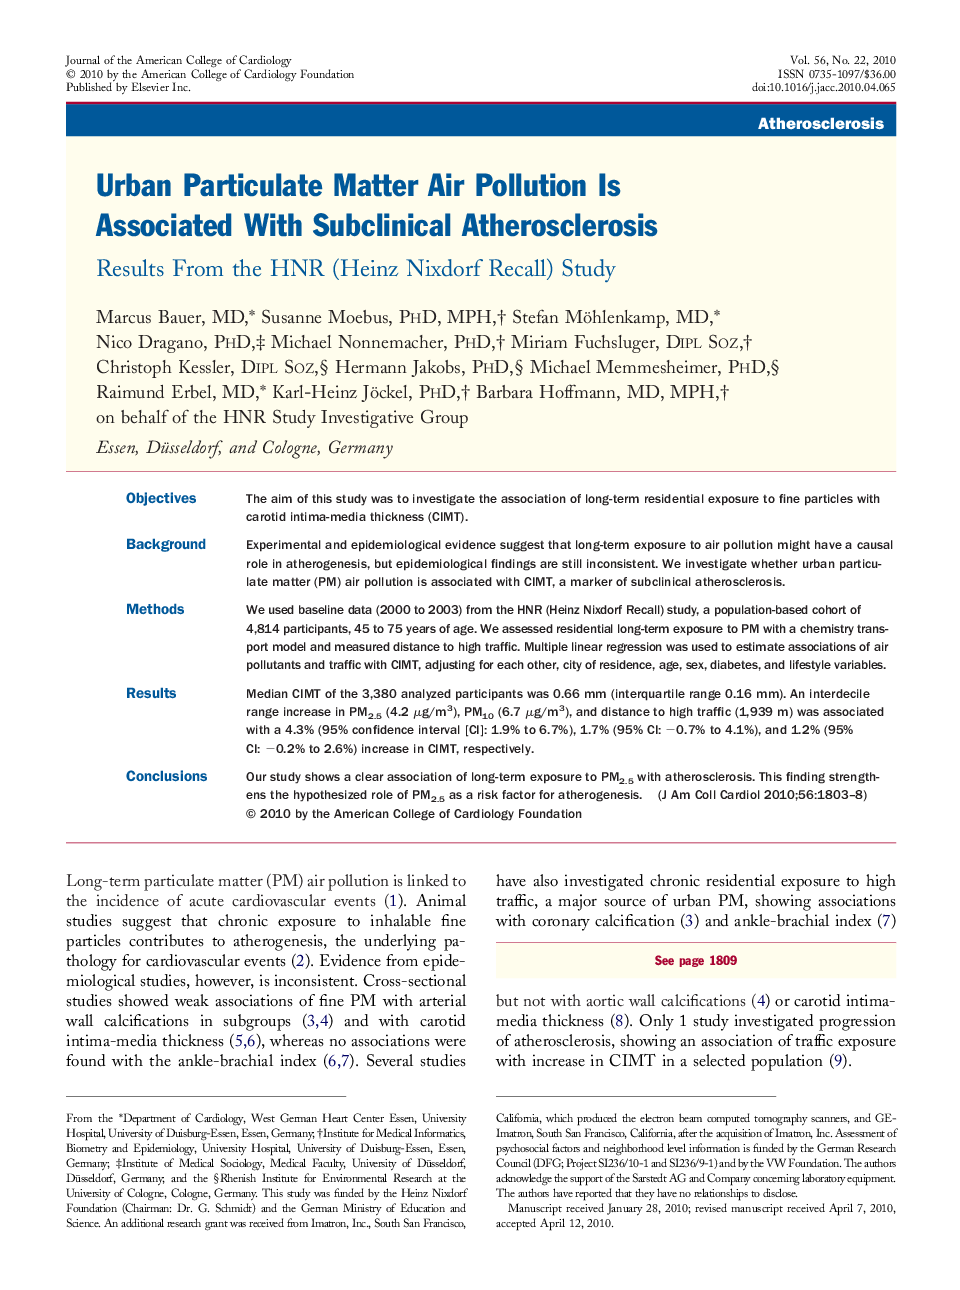 Urban Particulate Matter Air Pollution Is Associated With Subclinical Atherosclerosis : Results From the HNR (Heinz Nixdorf Recall) Study